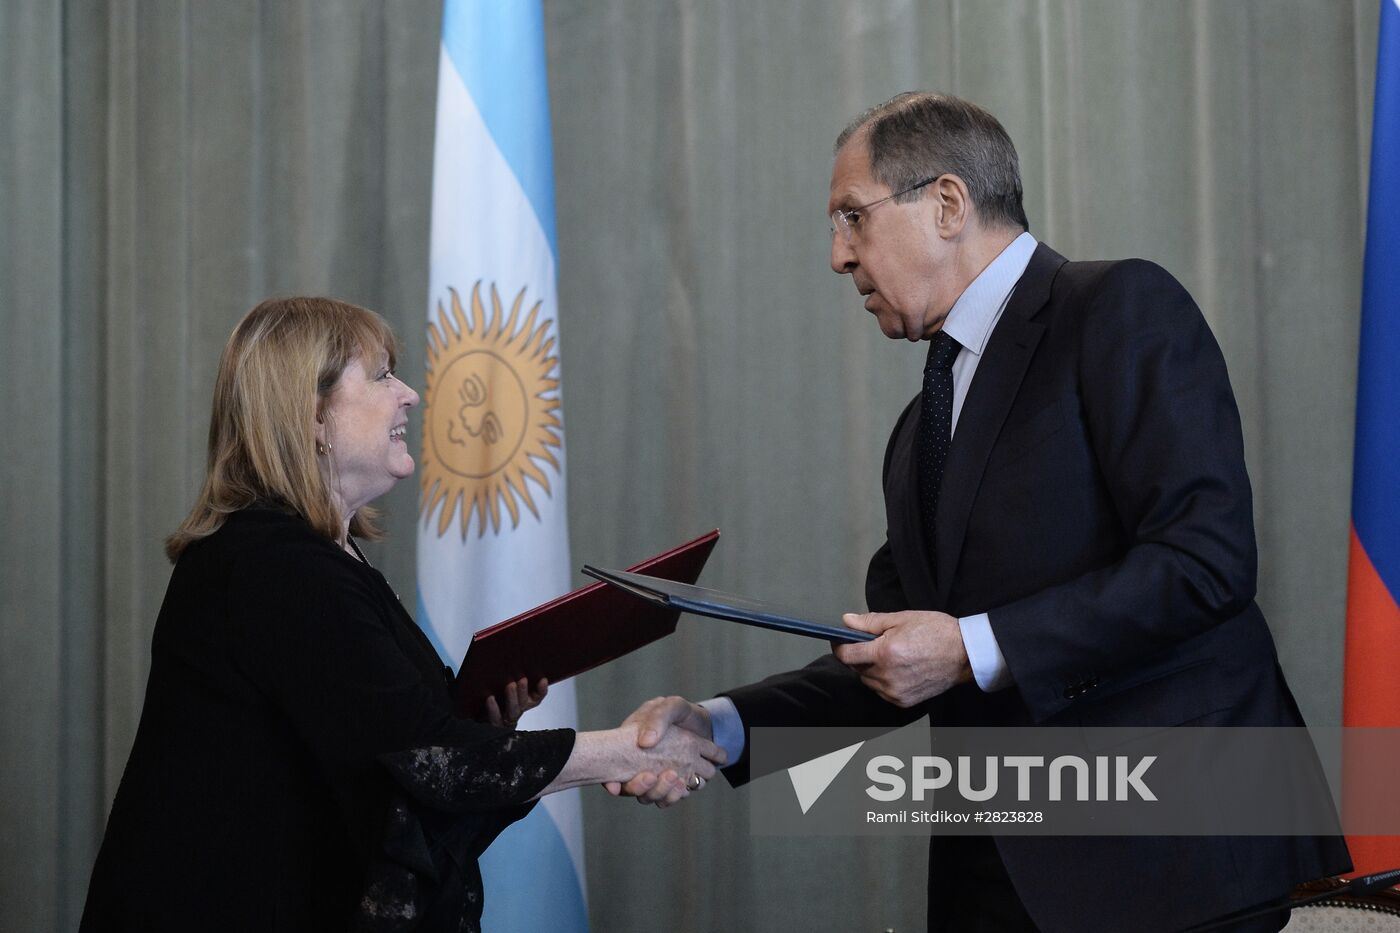 Foreign Minister Sergey Lavrov meets with Foreign Minister of Argentina Susana Malcorra